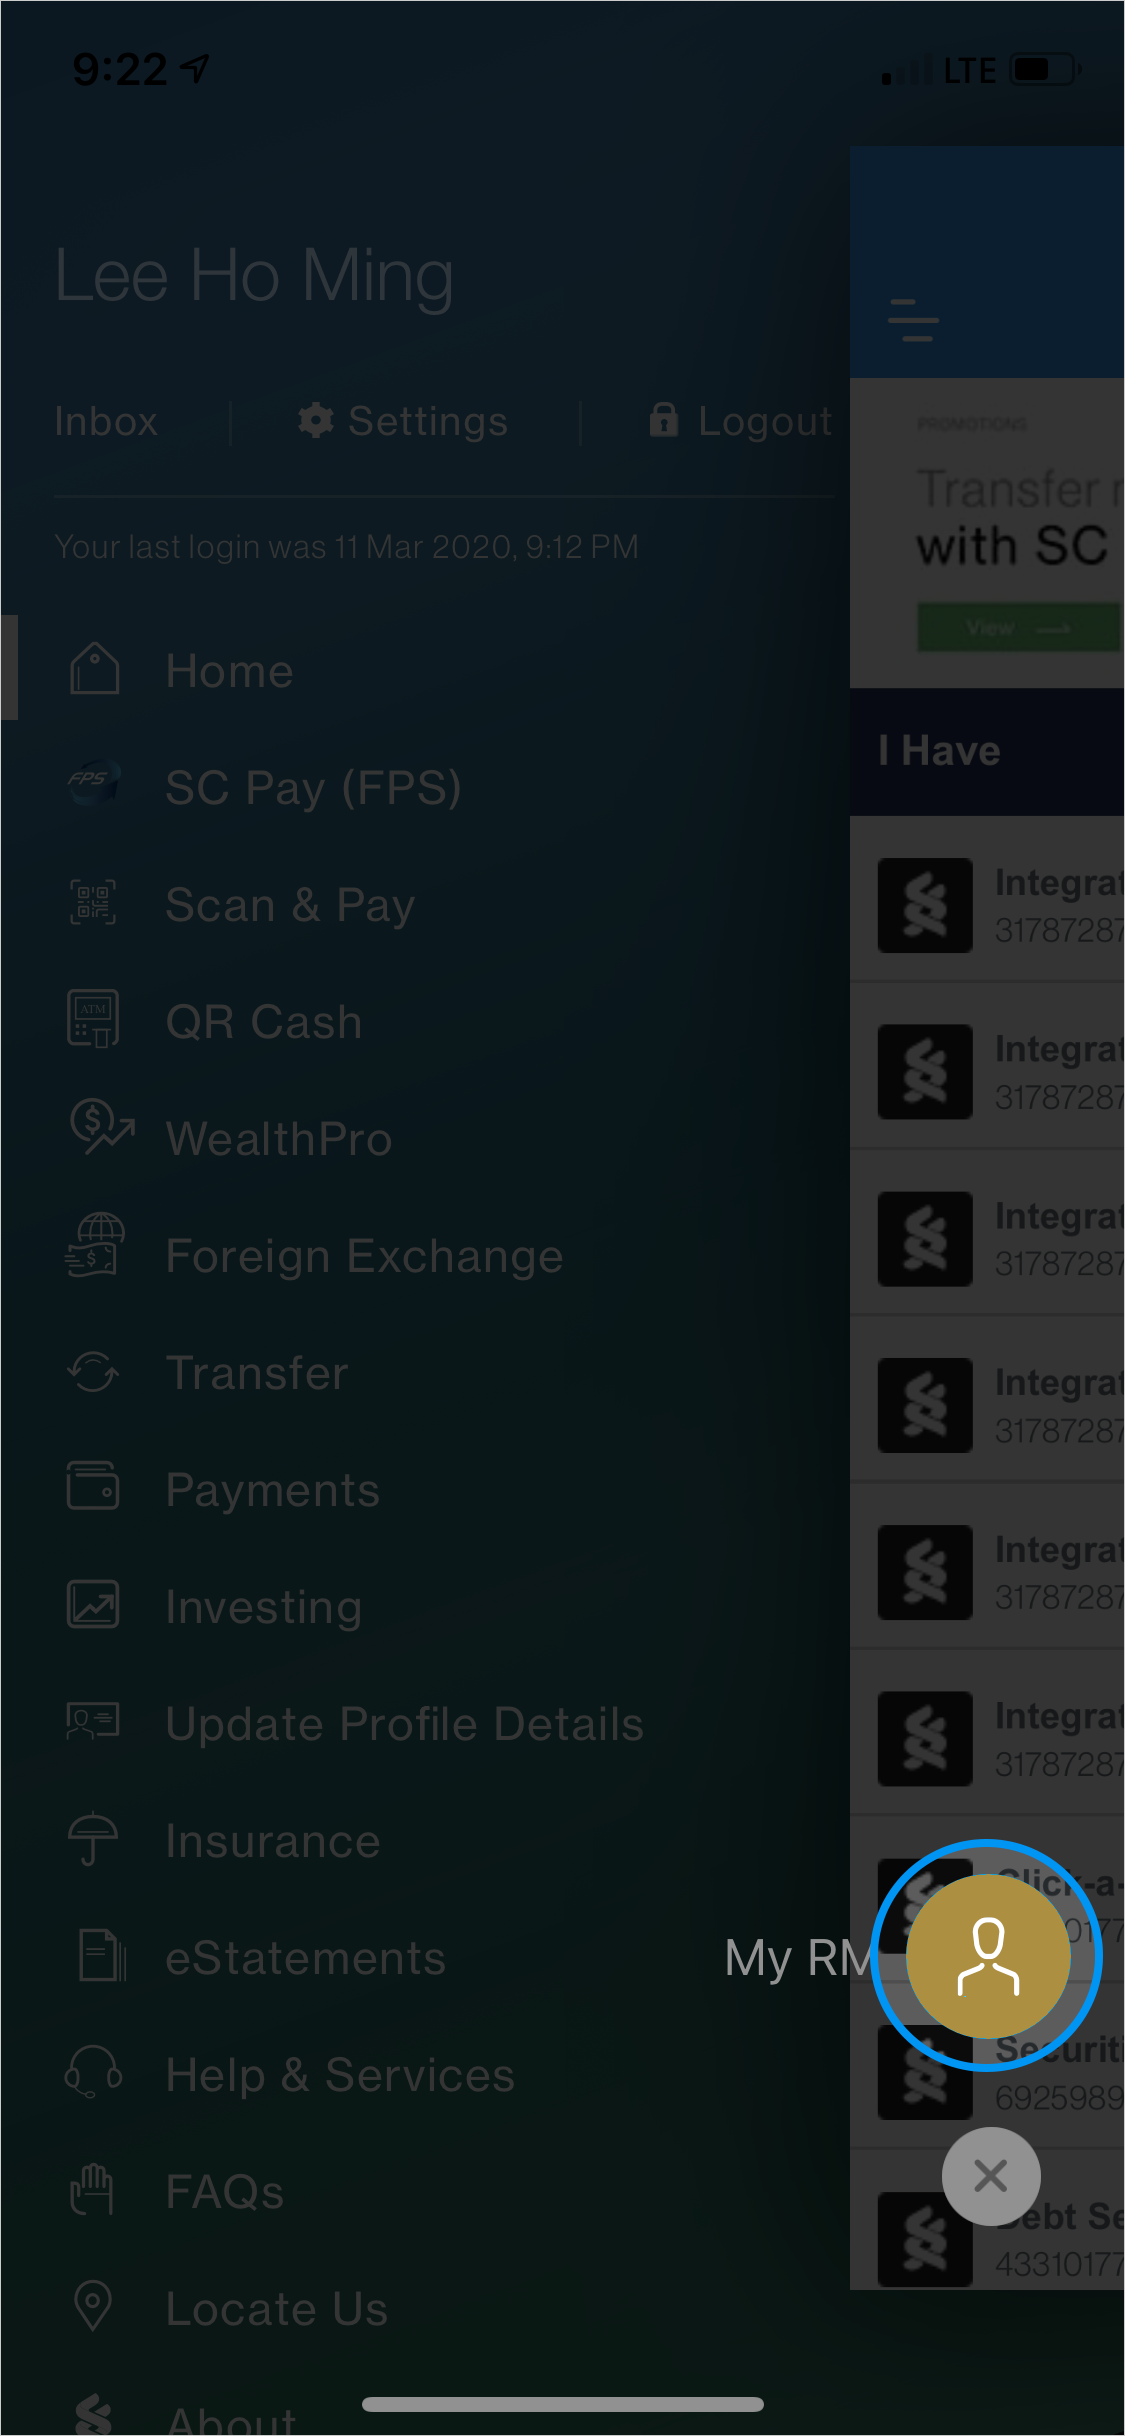 in the menu sidebar, Select “Foreign Exchange”.